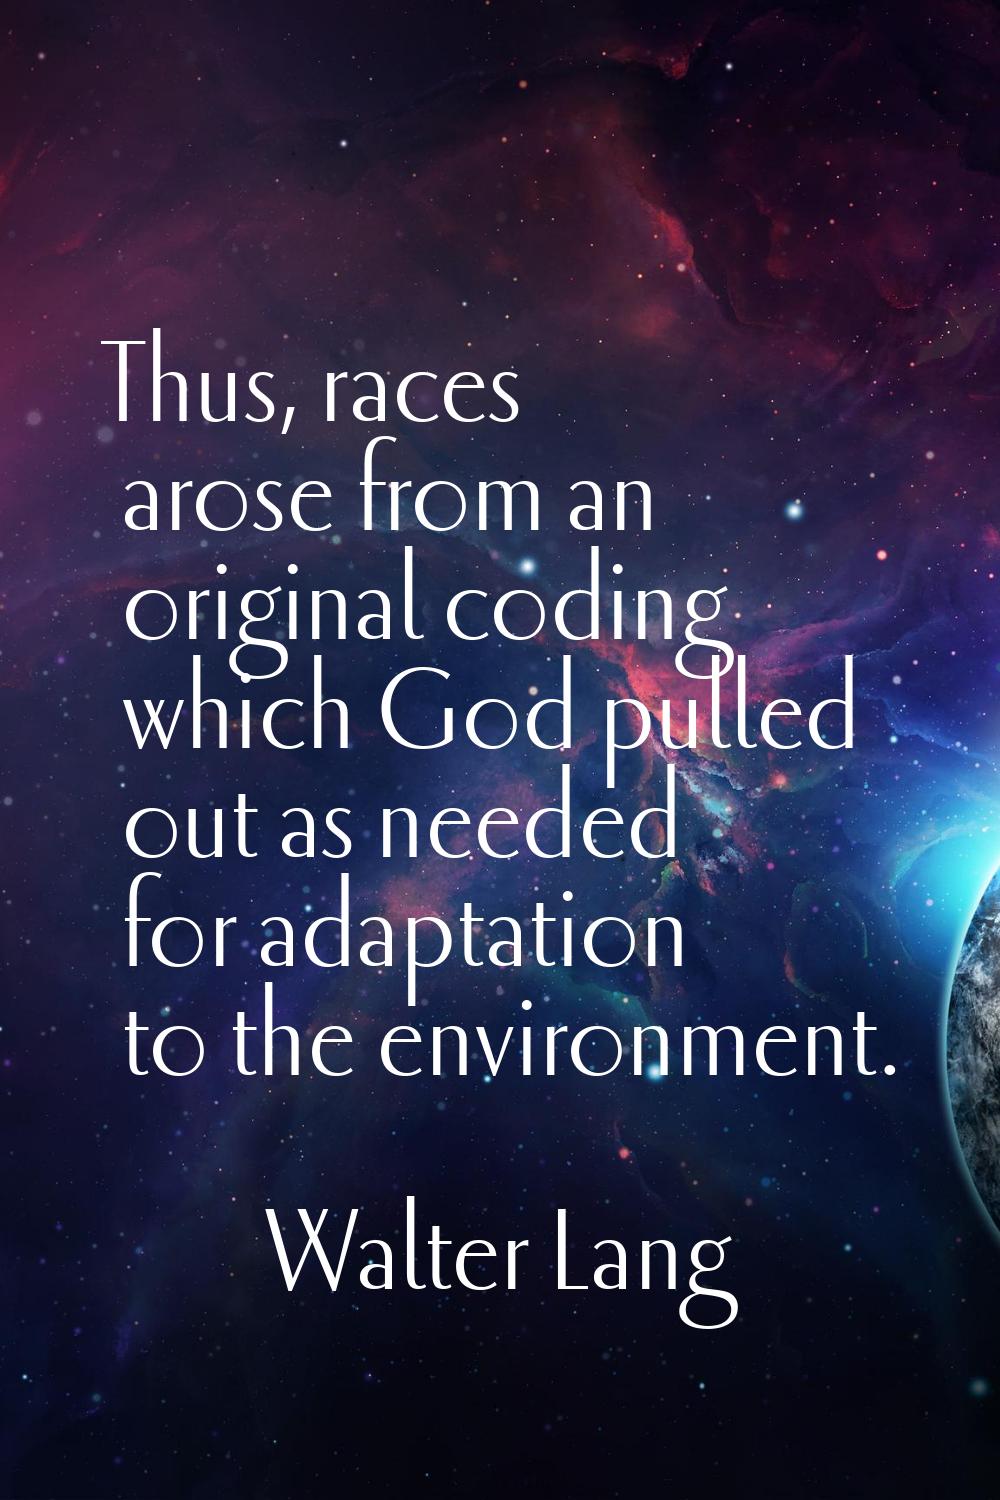 Thus, races arose from an original coding which God pulled out as needed for adaptation to the envi